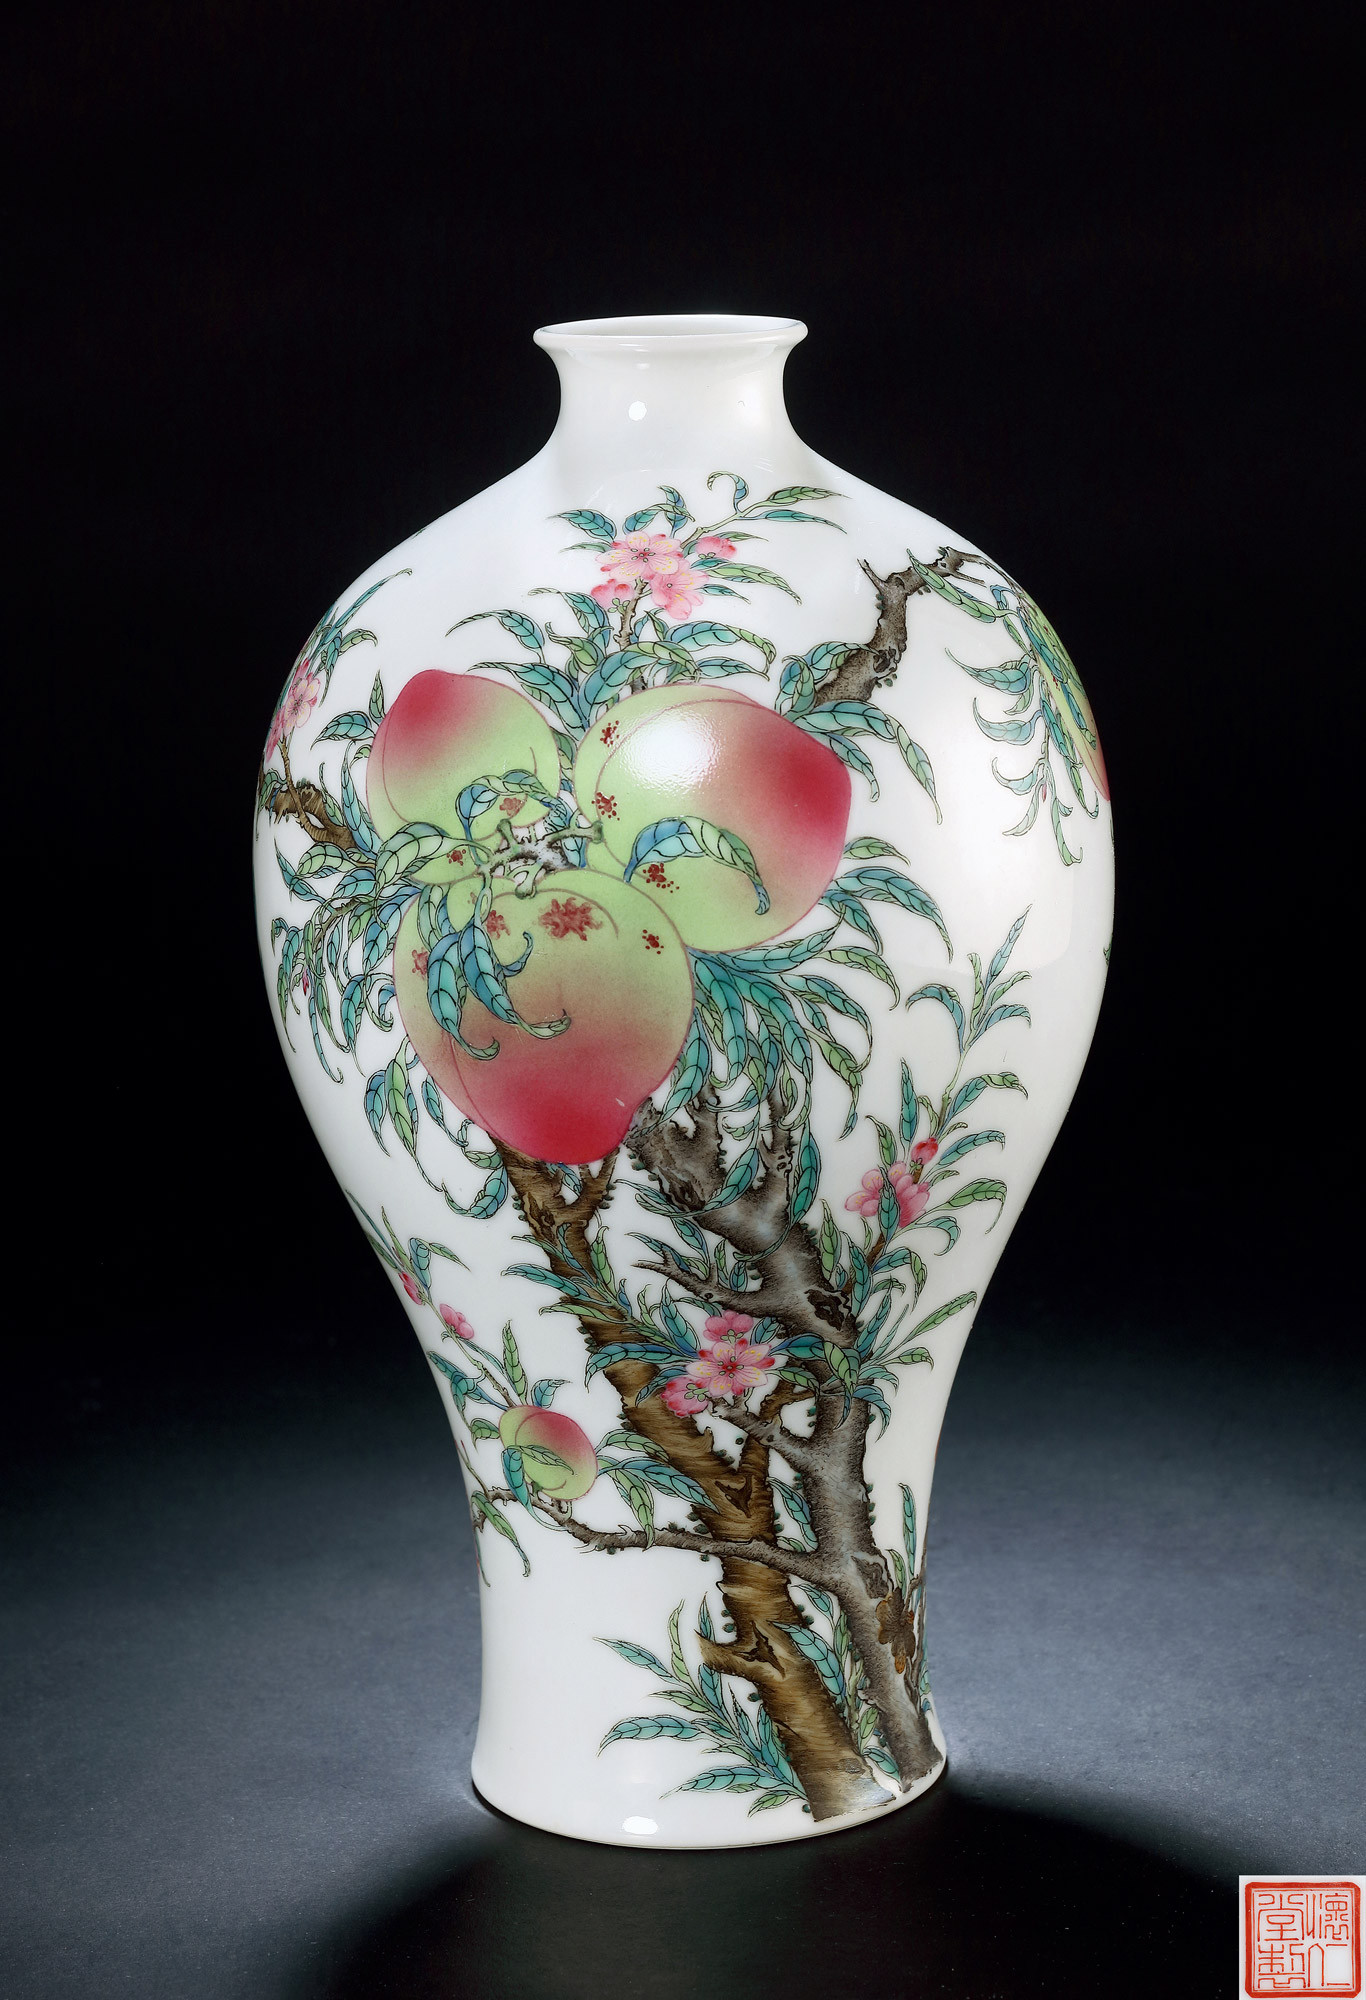 A FAMILLE-ROSE VASE WITH PEACH DESIGN